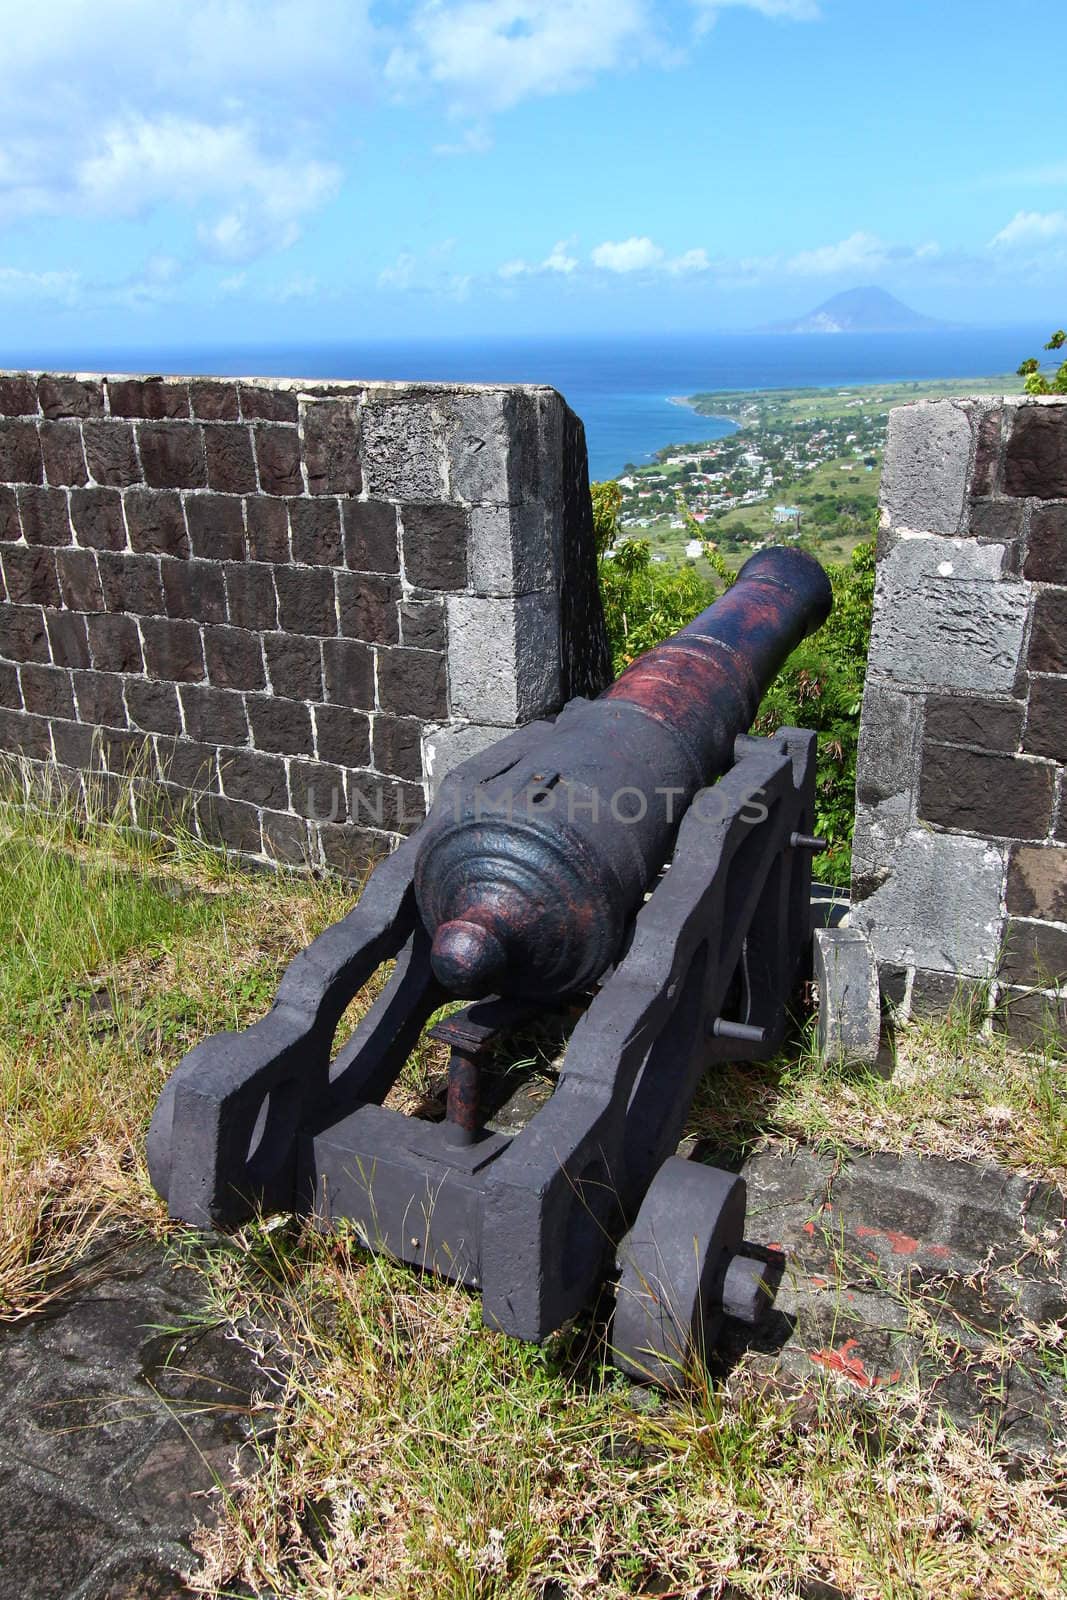 A cannon at Brimstone Hill Fortress National Park in Saint Kitts.